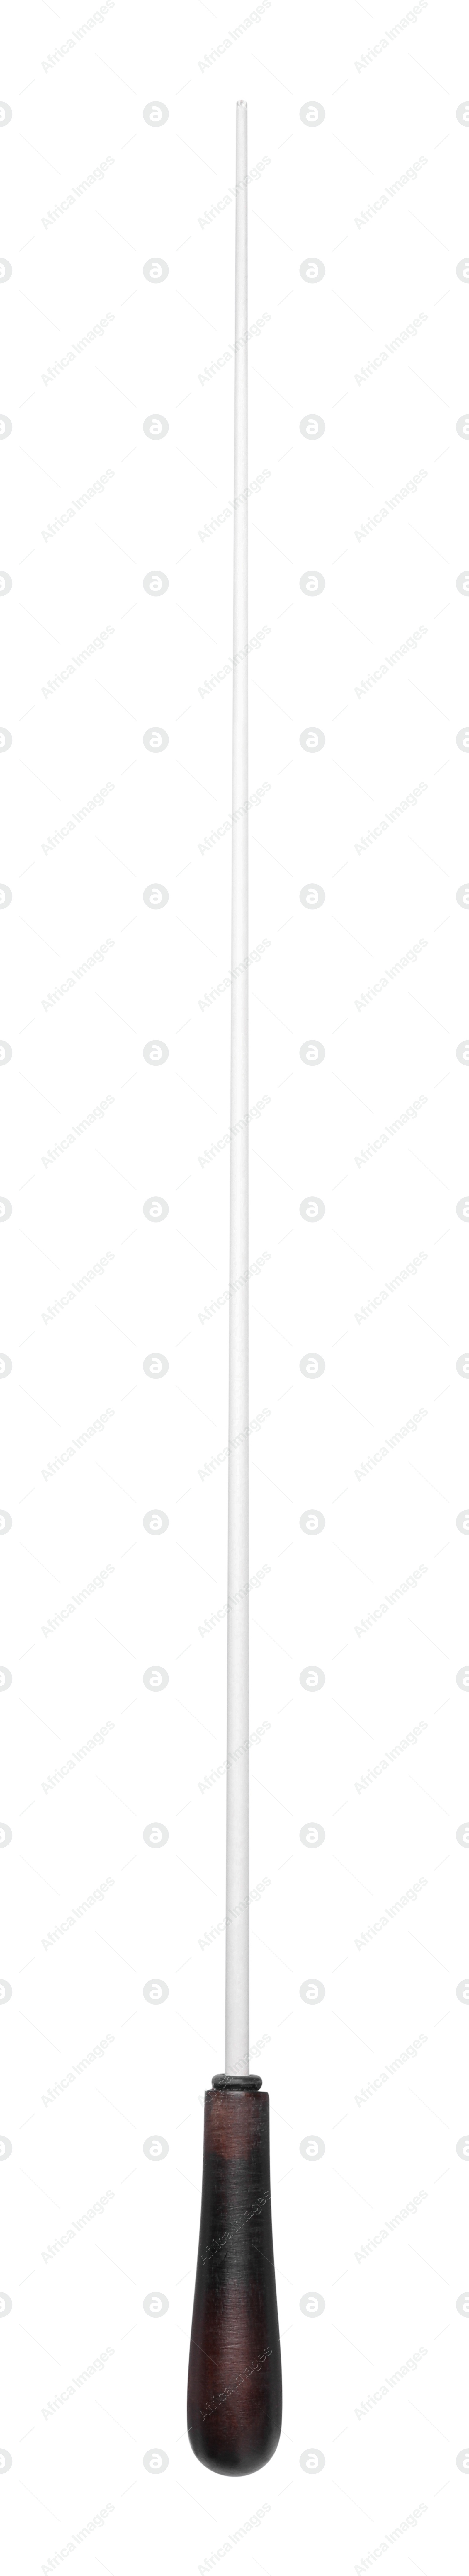 Photo of Conductor's baton isolated on white, top view